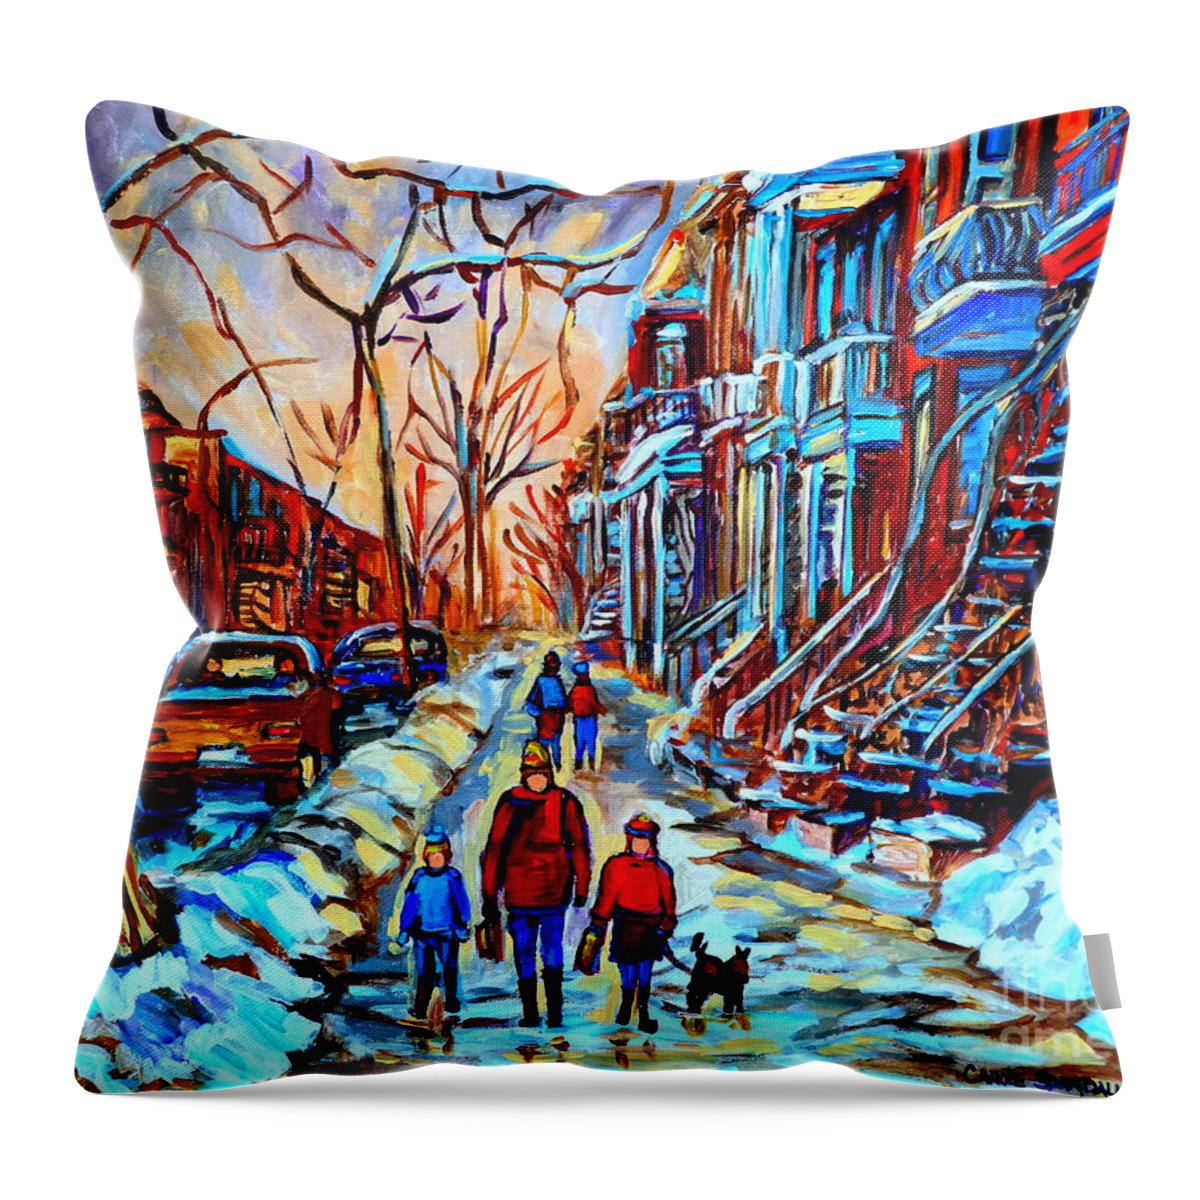 Montreal Throw Pillow featuring the painting Streets Of Montreal by Carole Spandau